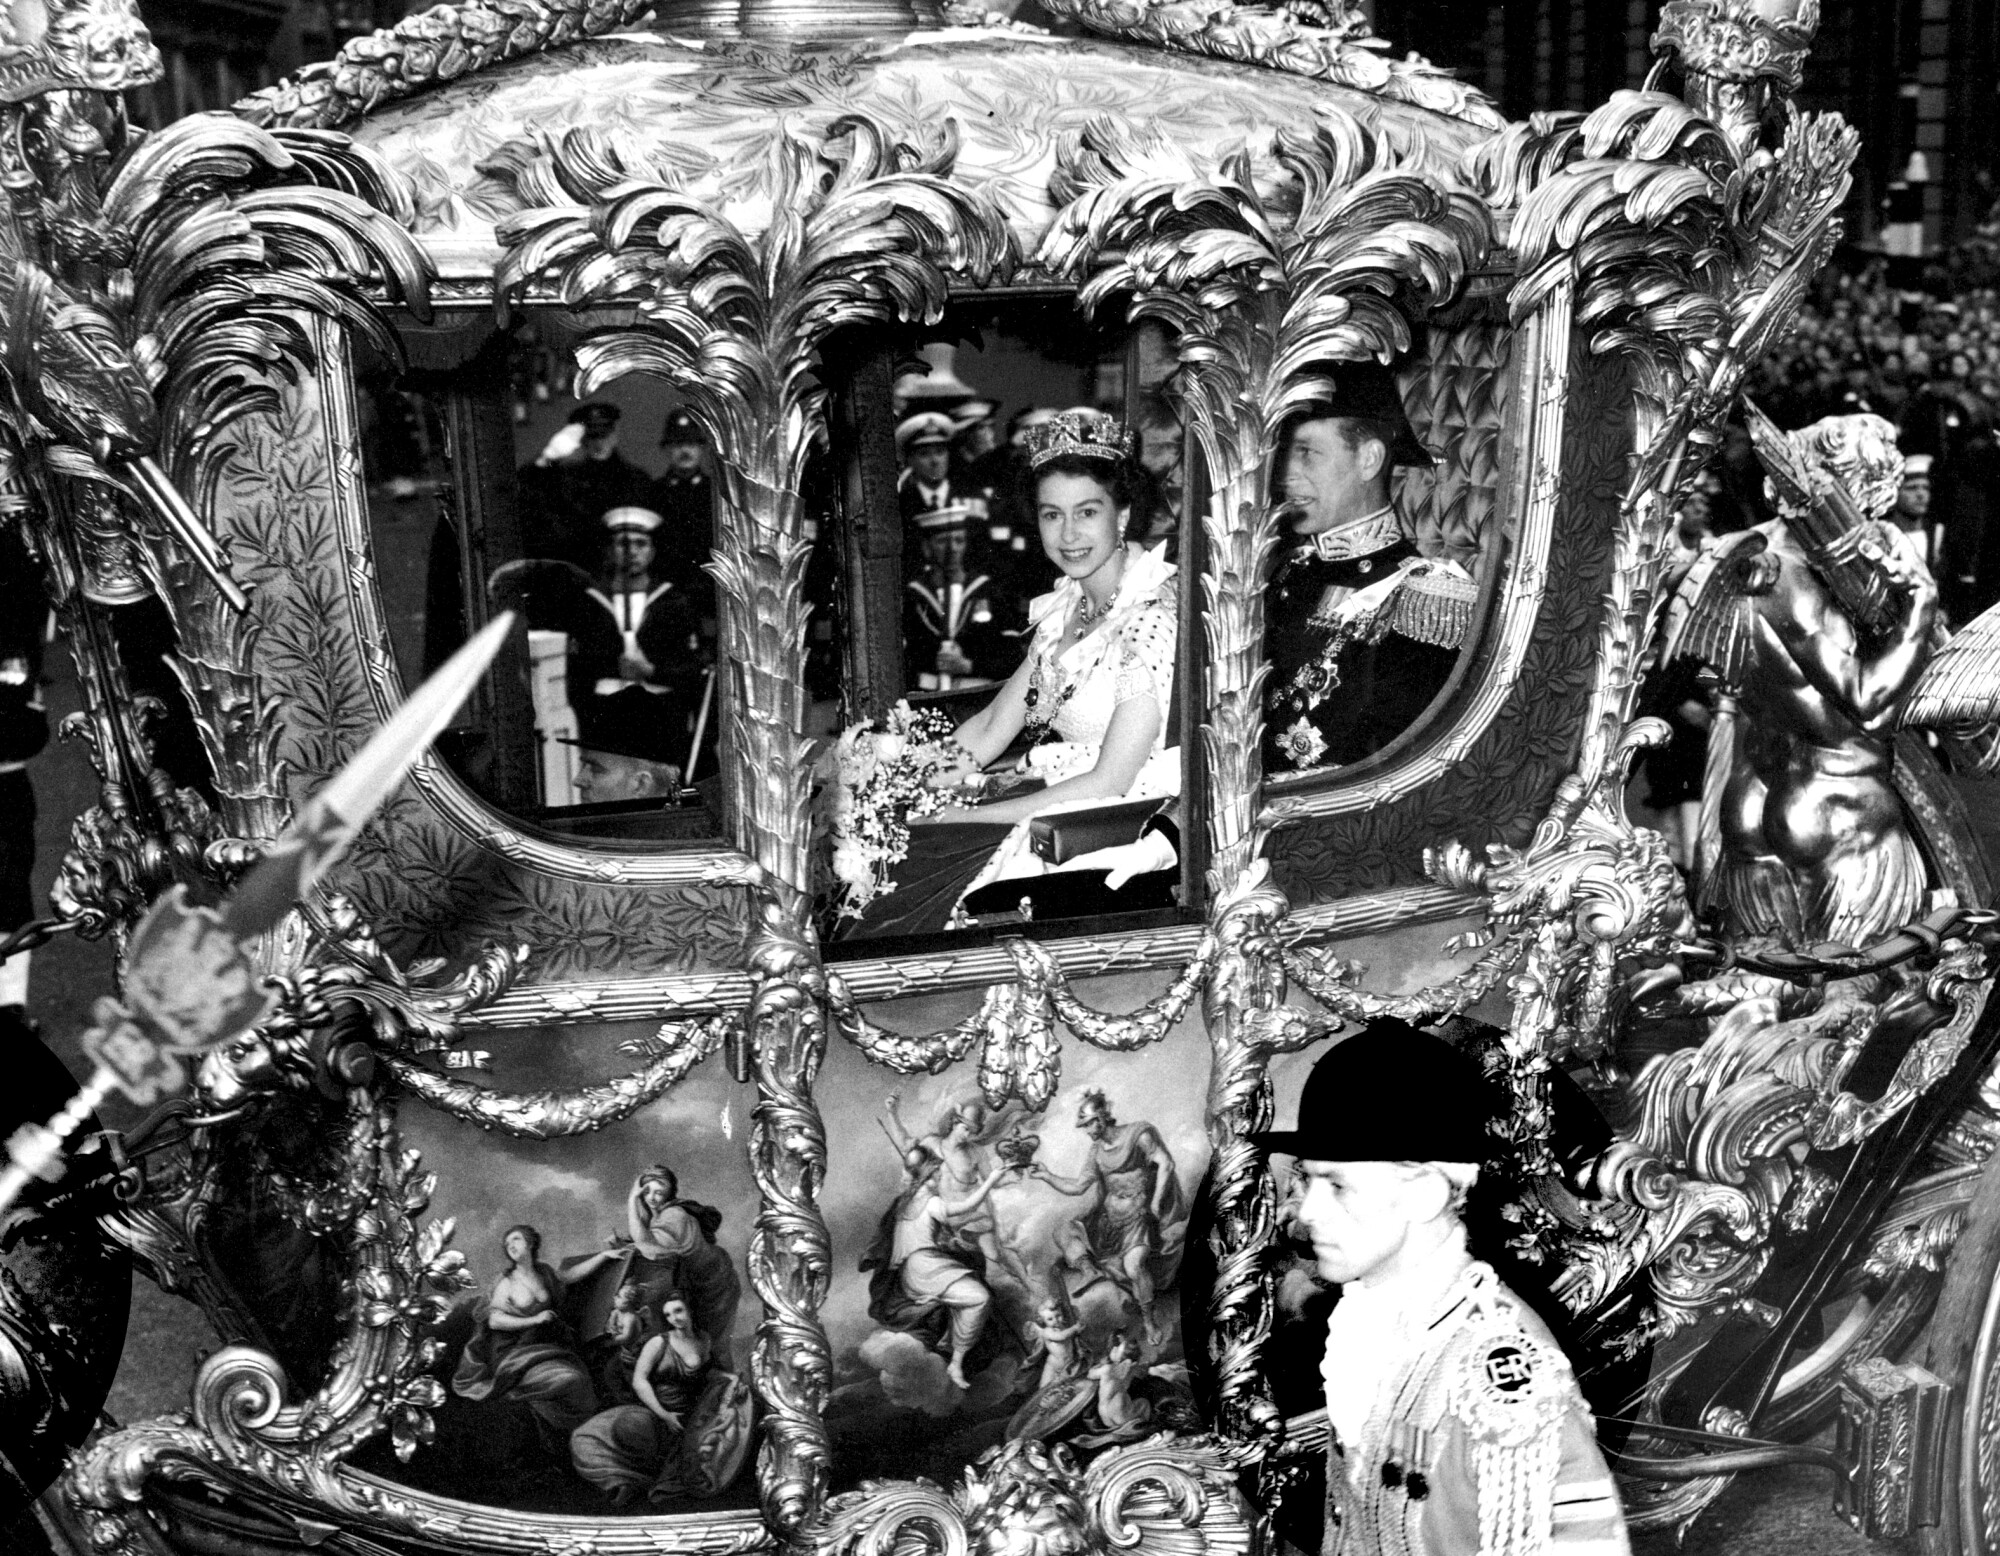 A woman wearing a crown and a white dress smiles as she rides in an ornate carriage beside a man in military uniform 